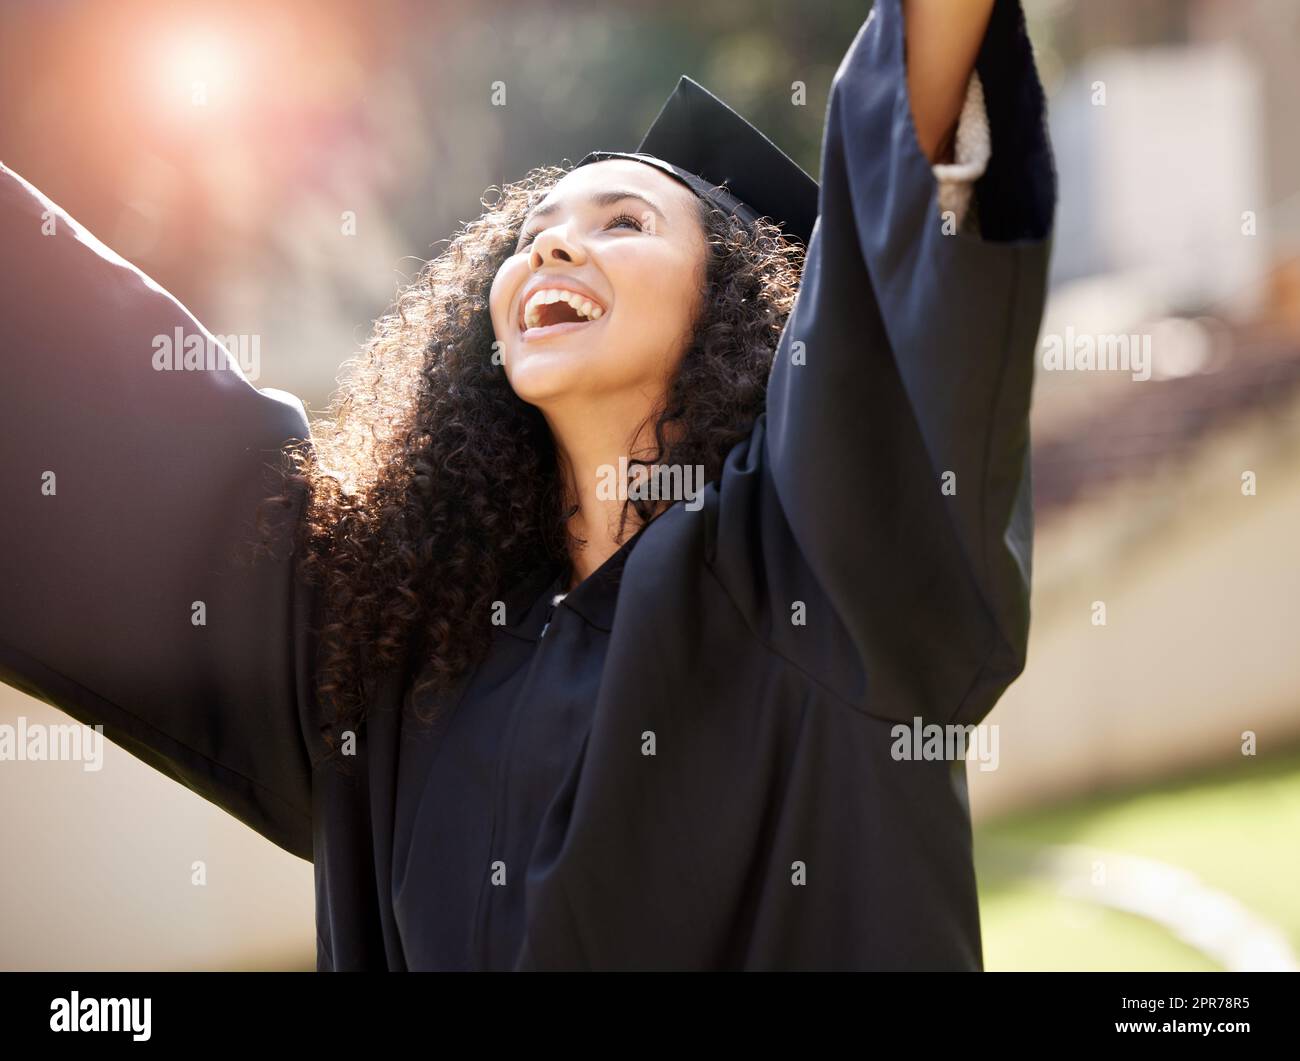 Im going to achieve all my hopes for the future. Shot of a young woman cheering on graduation day. Stock Photo